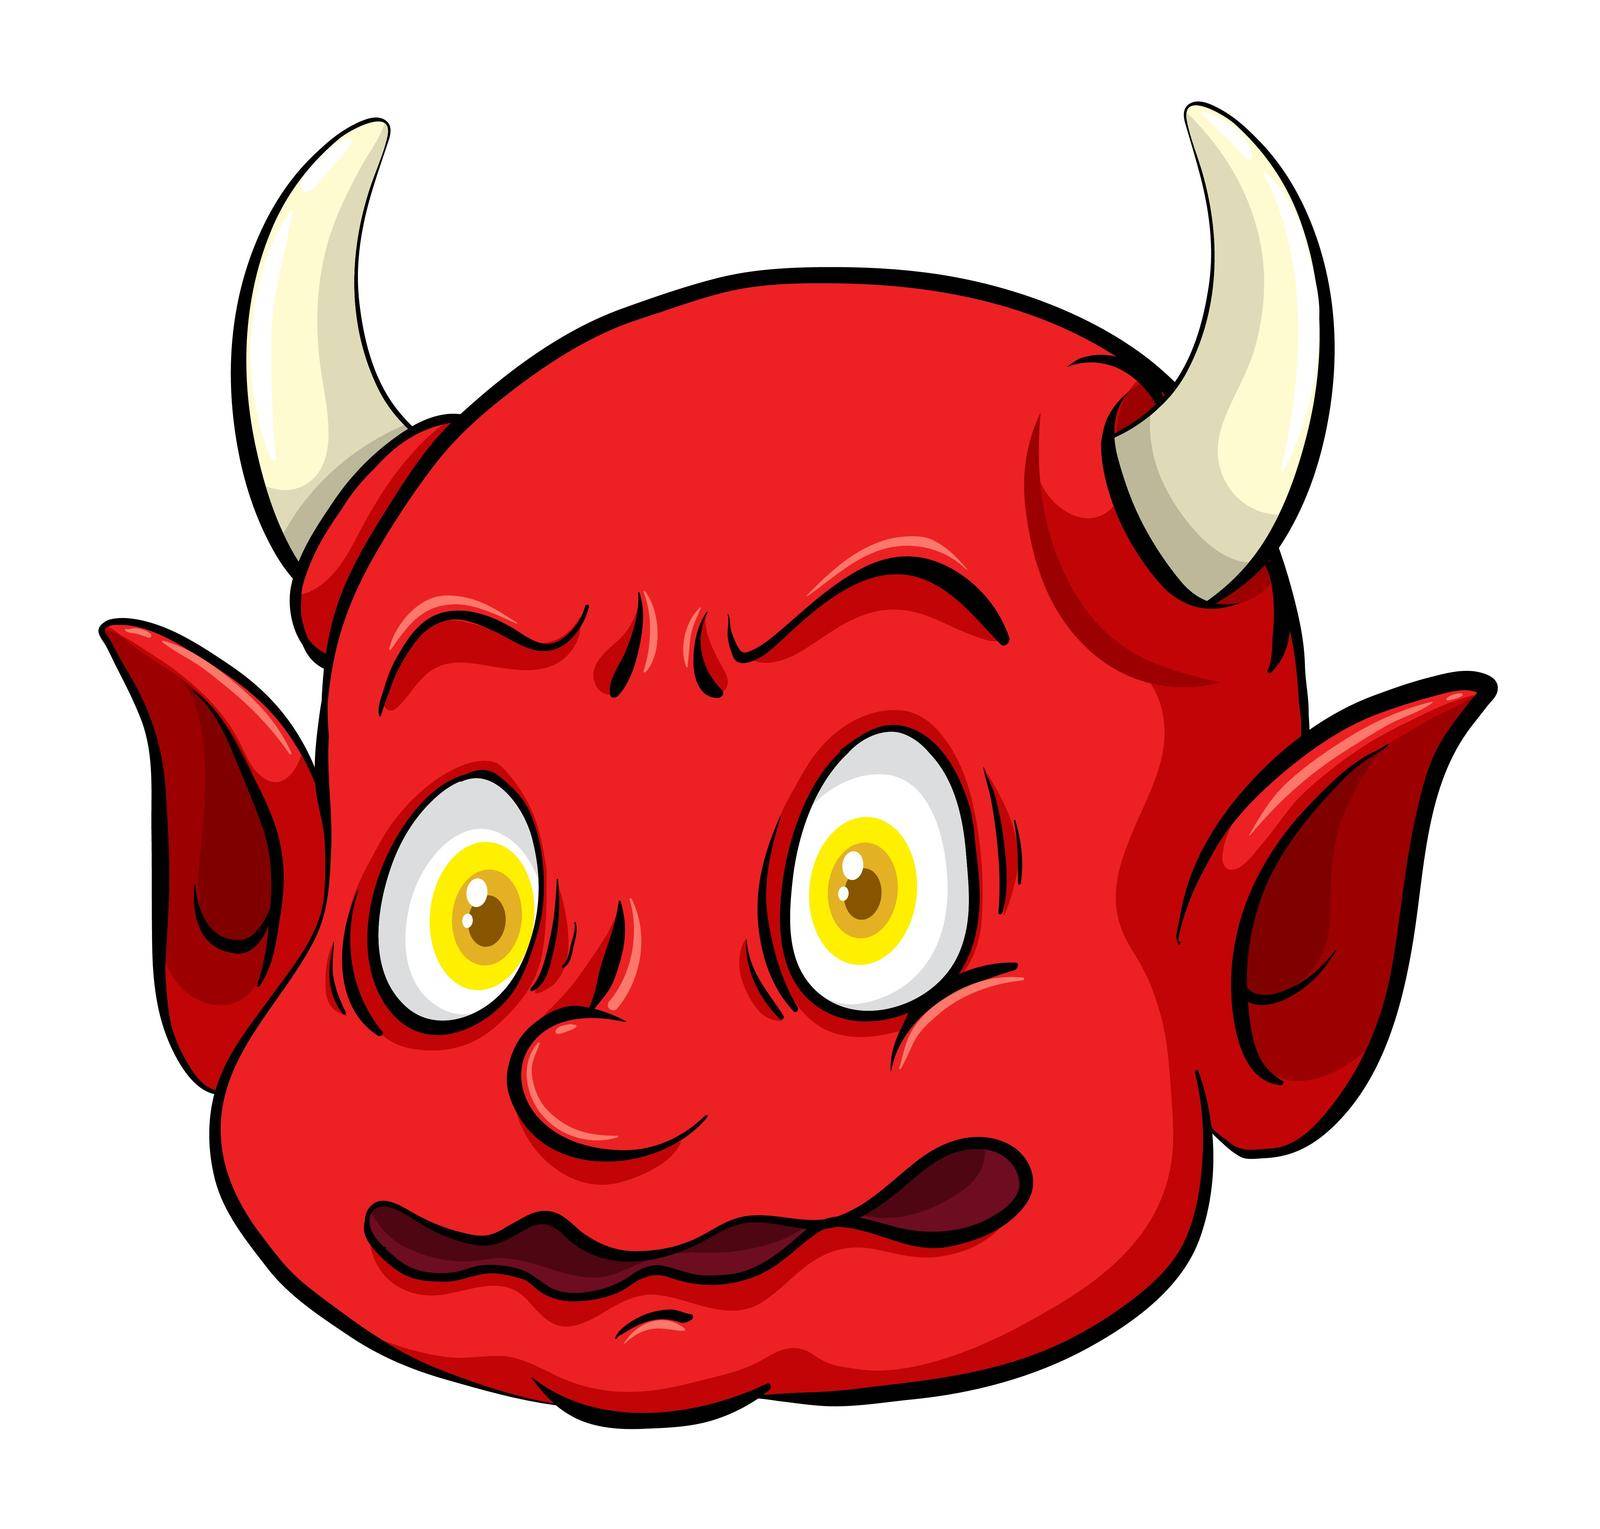 Scary red creature with a horn on a white background